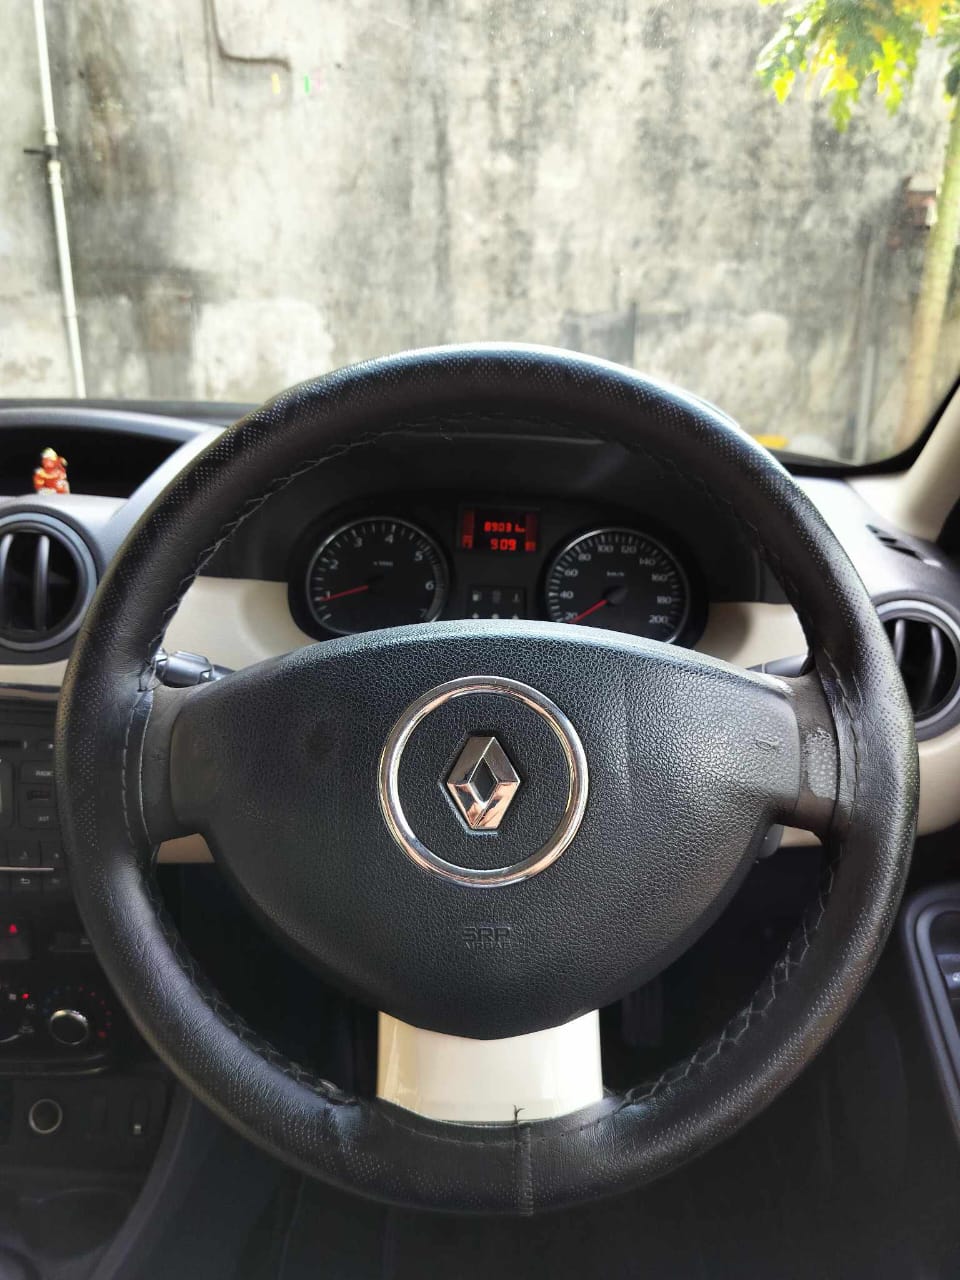 Details View - Renault Duster photos - reseller,reseller marketplace,advetising your products,reseller bazzar,resellerbazzar.in,india's classified site,Renault Duster, Old Renault Duster, Used Renault Duster  in Ahmedabad, old Renault Duster  in Ahmedabad, Renault Duster in Gujarat